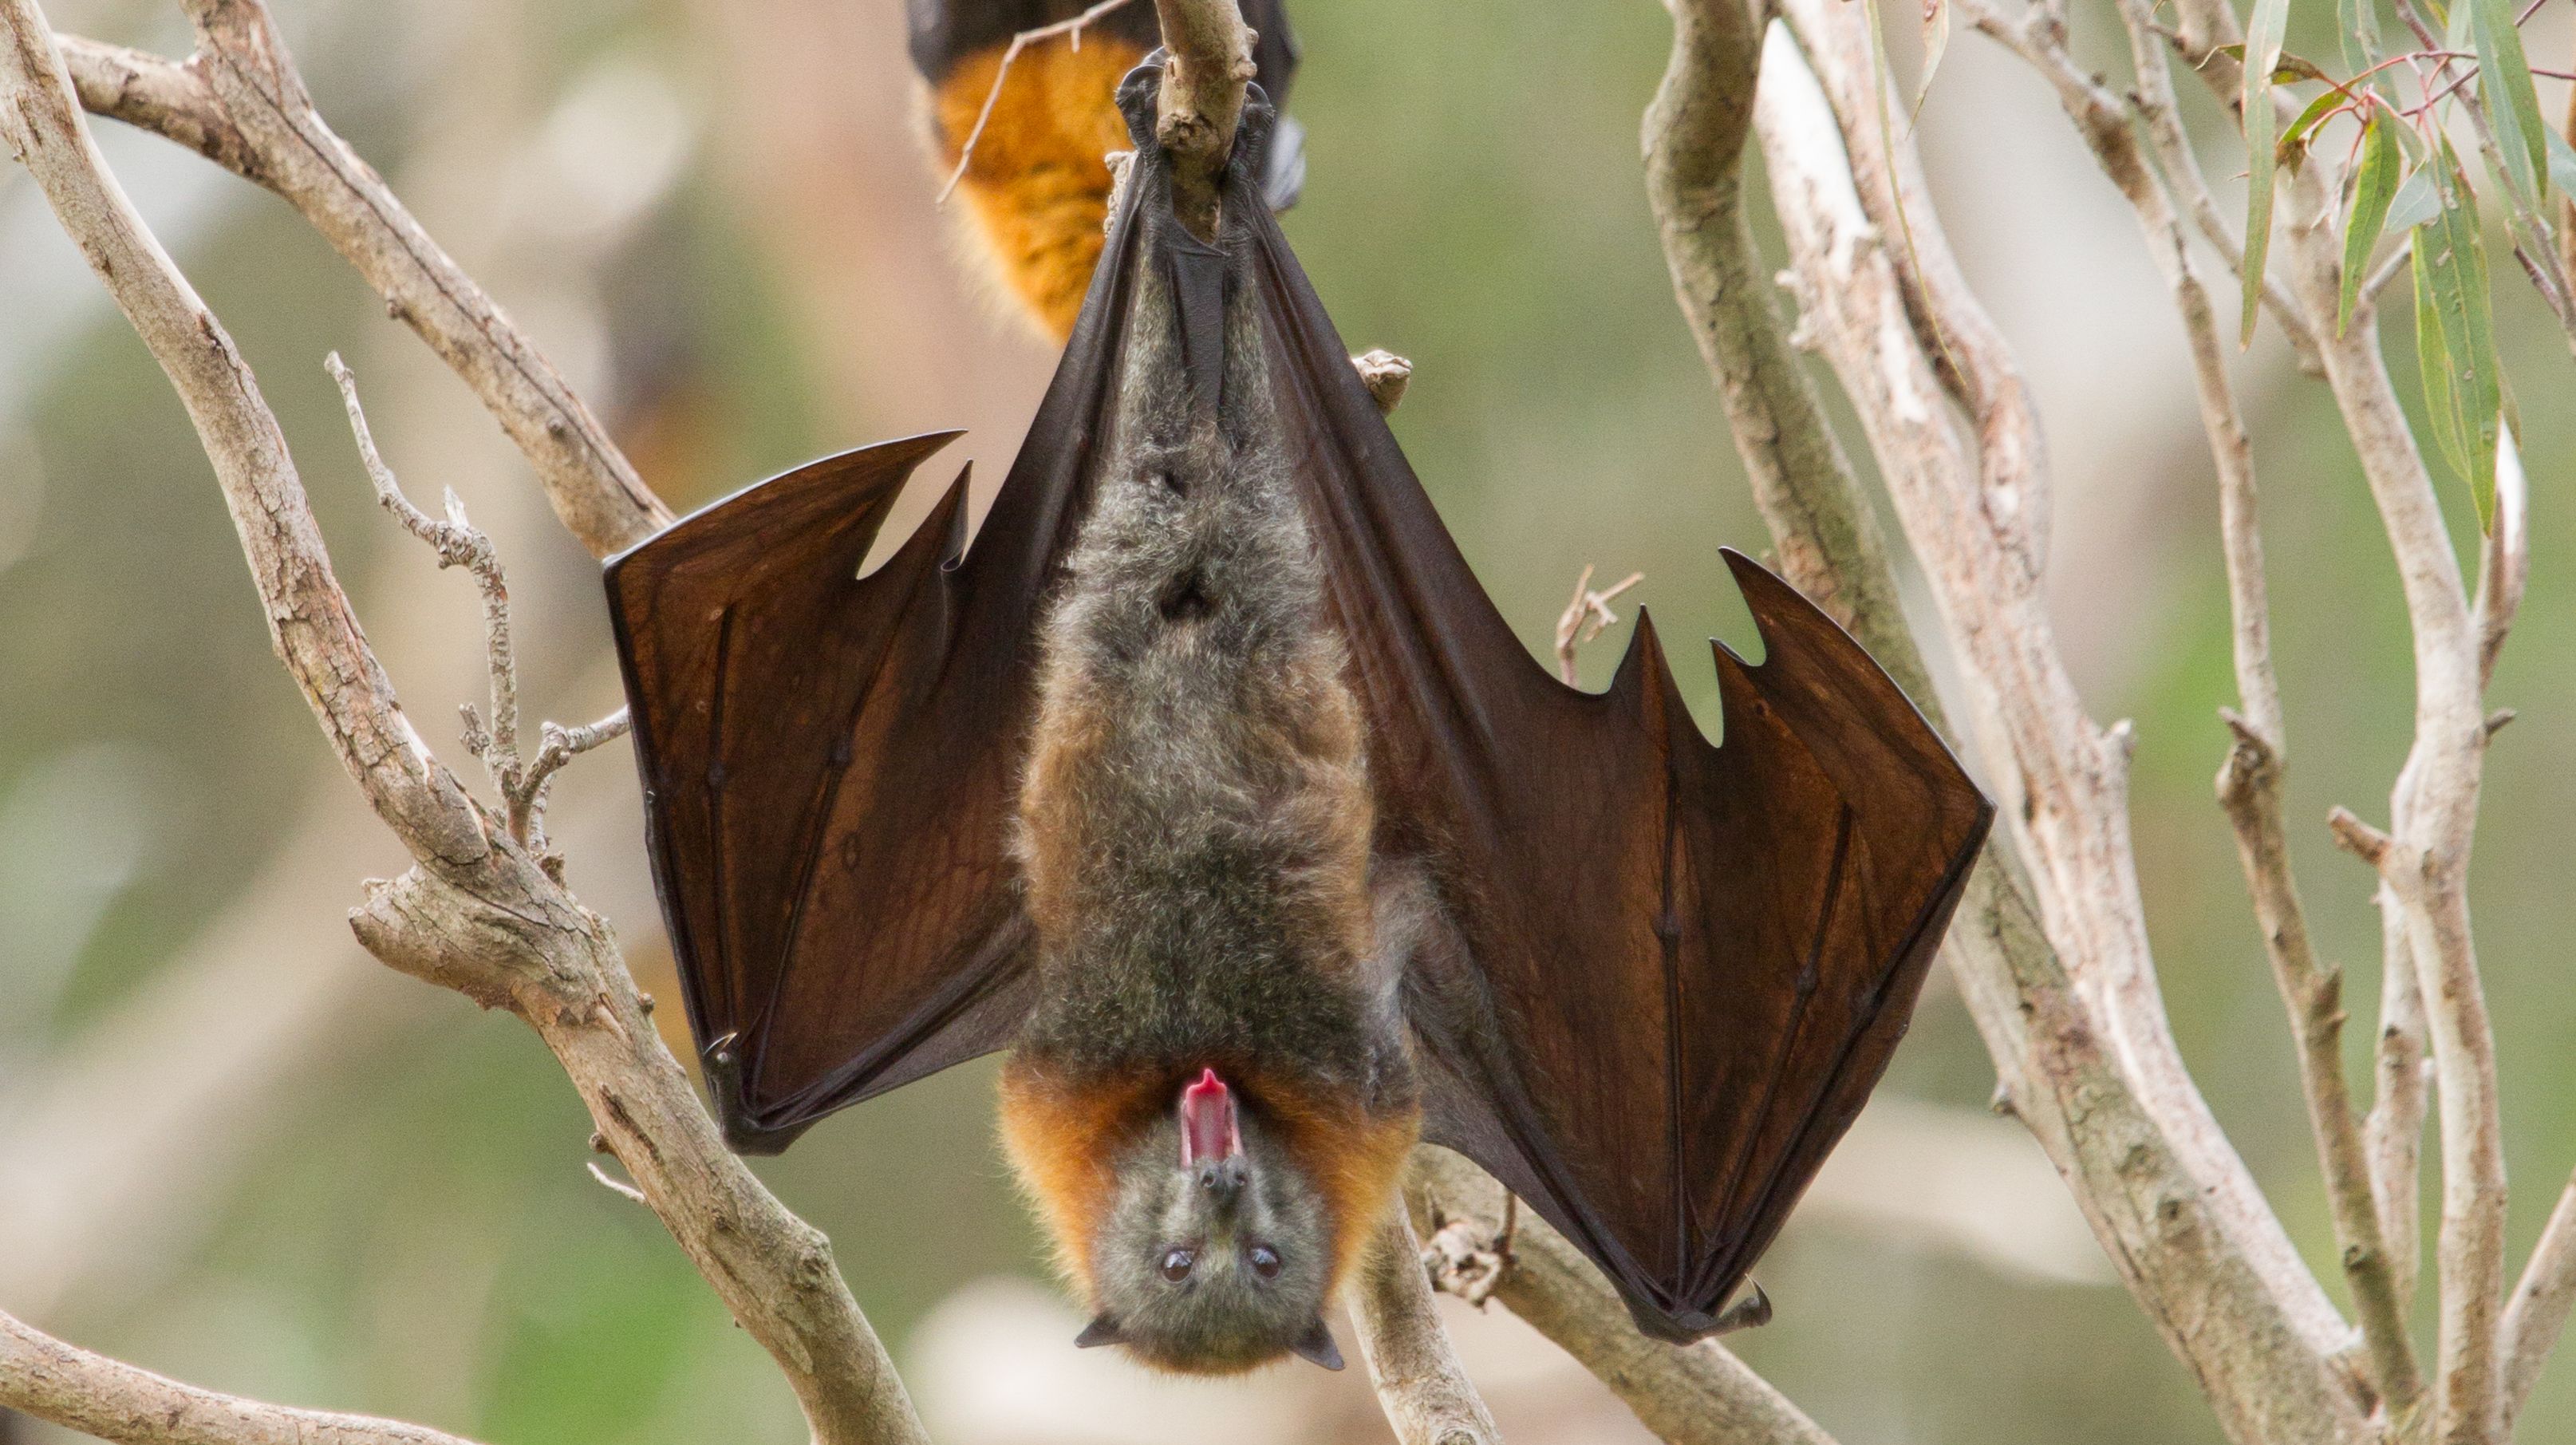 Why do bats hang upside down while they sleep?